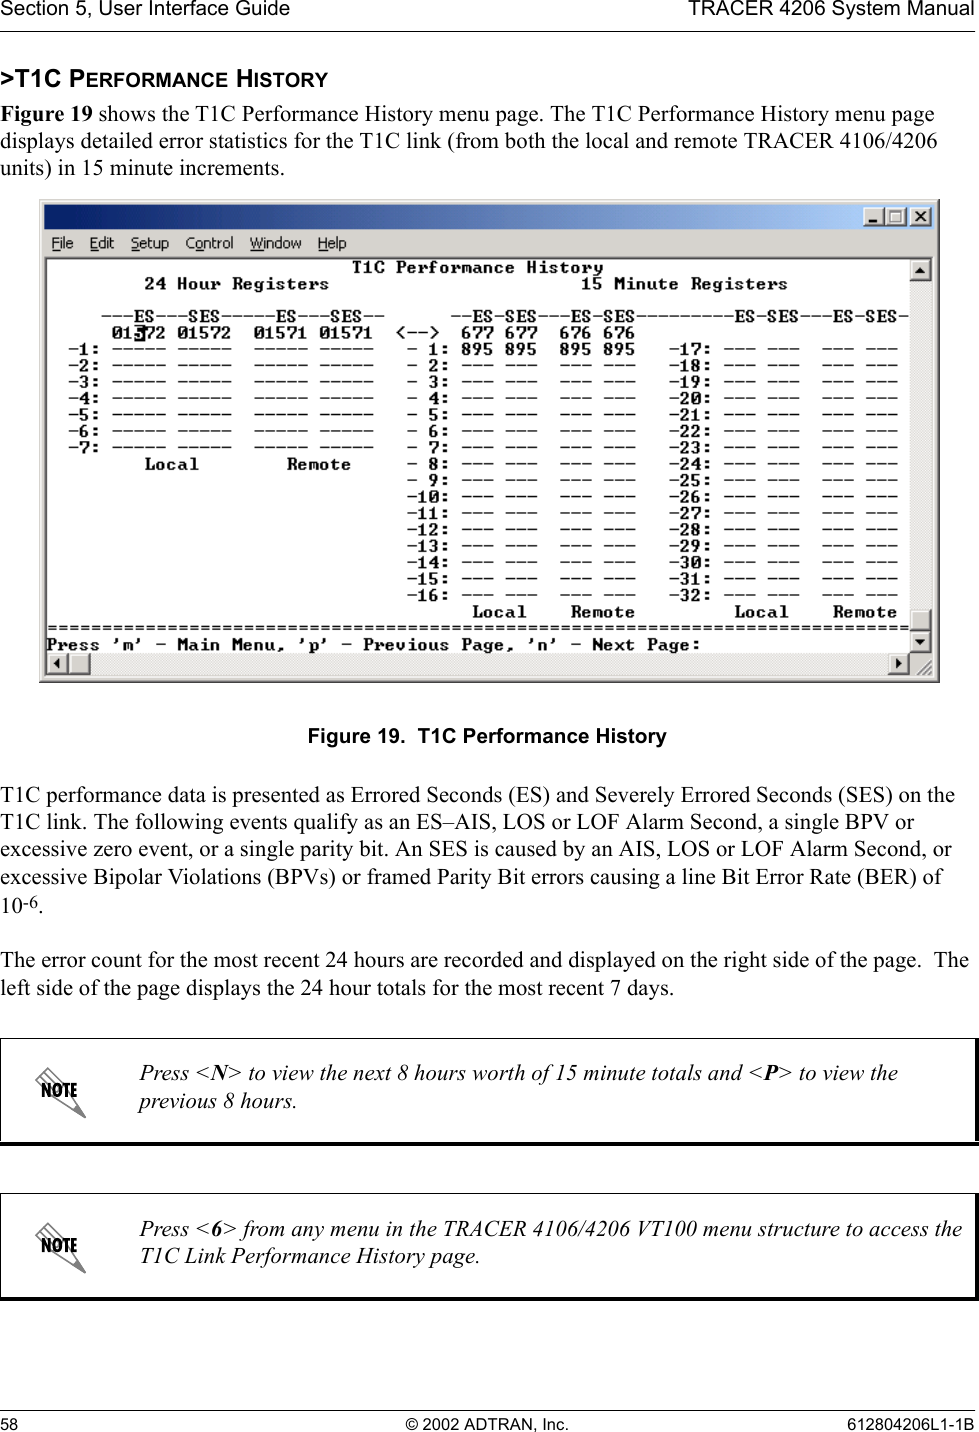 Section 5, User Interface Guide TRACER 4206 System Manual58 © 2002 ADTRAN, Inc. 612804206L1-1B&gt;T1C PERFORMANCE HISTORYFigure 19 shows the T1C Performance History menu page. The T1C Performance History menu page displays detailed error statistics for the T1C link (from both the local and remote TRACER 4106/4206 units) in 15 minute increments.Figure 19.  T1C Performance HistoryT1C performance data is presented as Errored Seconds (ES) and Severely Errored Seconds (SES) on the T1C link. The following events qualify as an ES–AIS, LOS or LOF Alarm Second, a single BPV or excessive zero event, or a single parity bit. An SES is caused by an AIS, LOS or LOF Alarm Second, or excessive Bipolar Violations (BPVs) or framed Parity Bit errors causing a line Bit Error Rate (BER) of 10-6.The error count for the most recent 24 hours are recorded and displayed on the right side of the page.  The left side of the page displays the 24 hour totals for the most recent 7 days.Press &lt;N&gt; to view the next 8 hours worth of 15 minute totals and &lt;P&gt; to view the previous 8 hours.Press &lt;6&gt; from any menu in the TRACER 4106/4206 VT100 menu structure to access the T1C Link Performance History page.